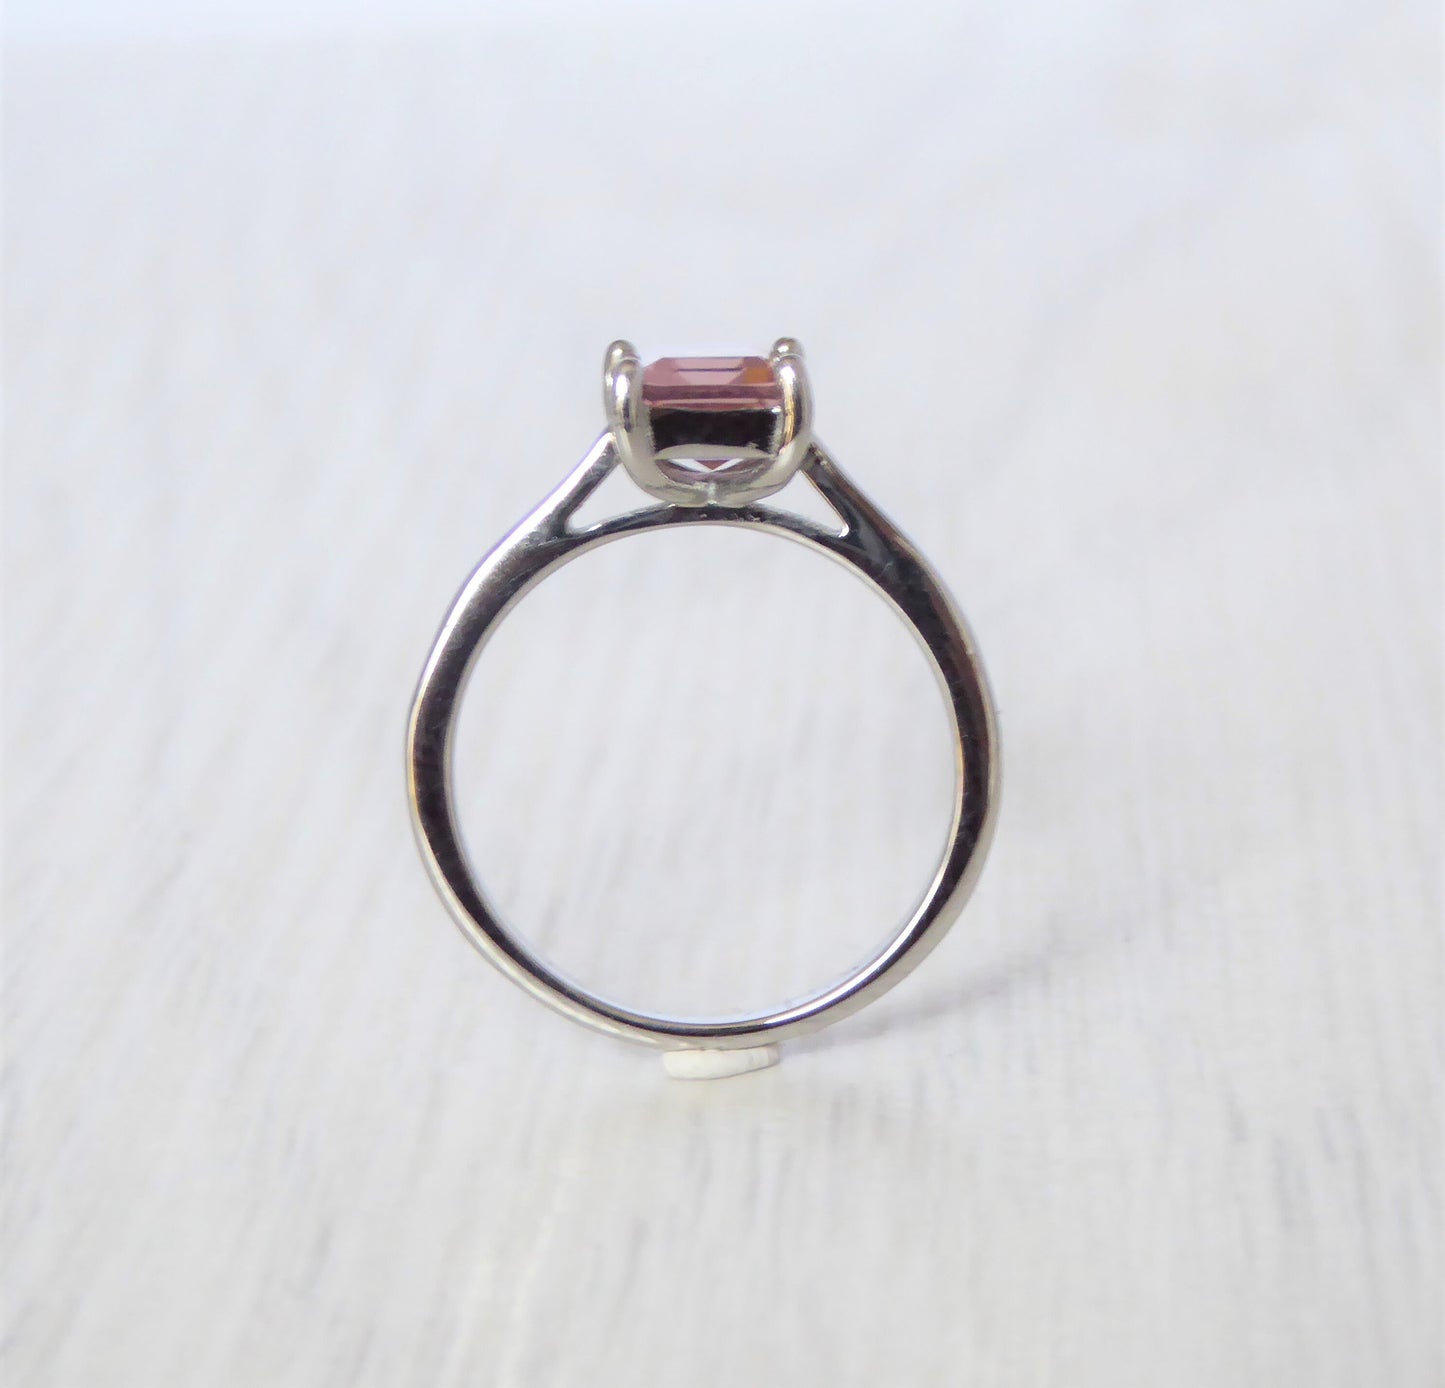 2ct Lab Morganite Emerald Cut Solitaire cathedral ring in Titanium or White Gold